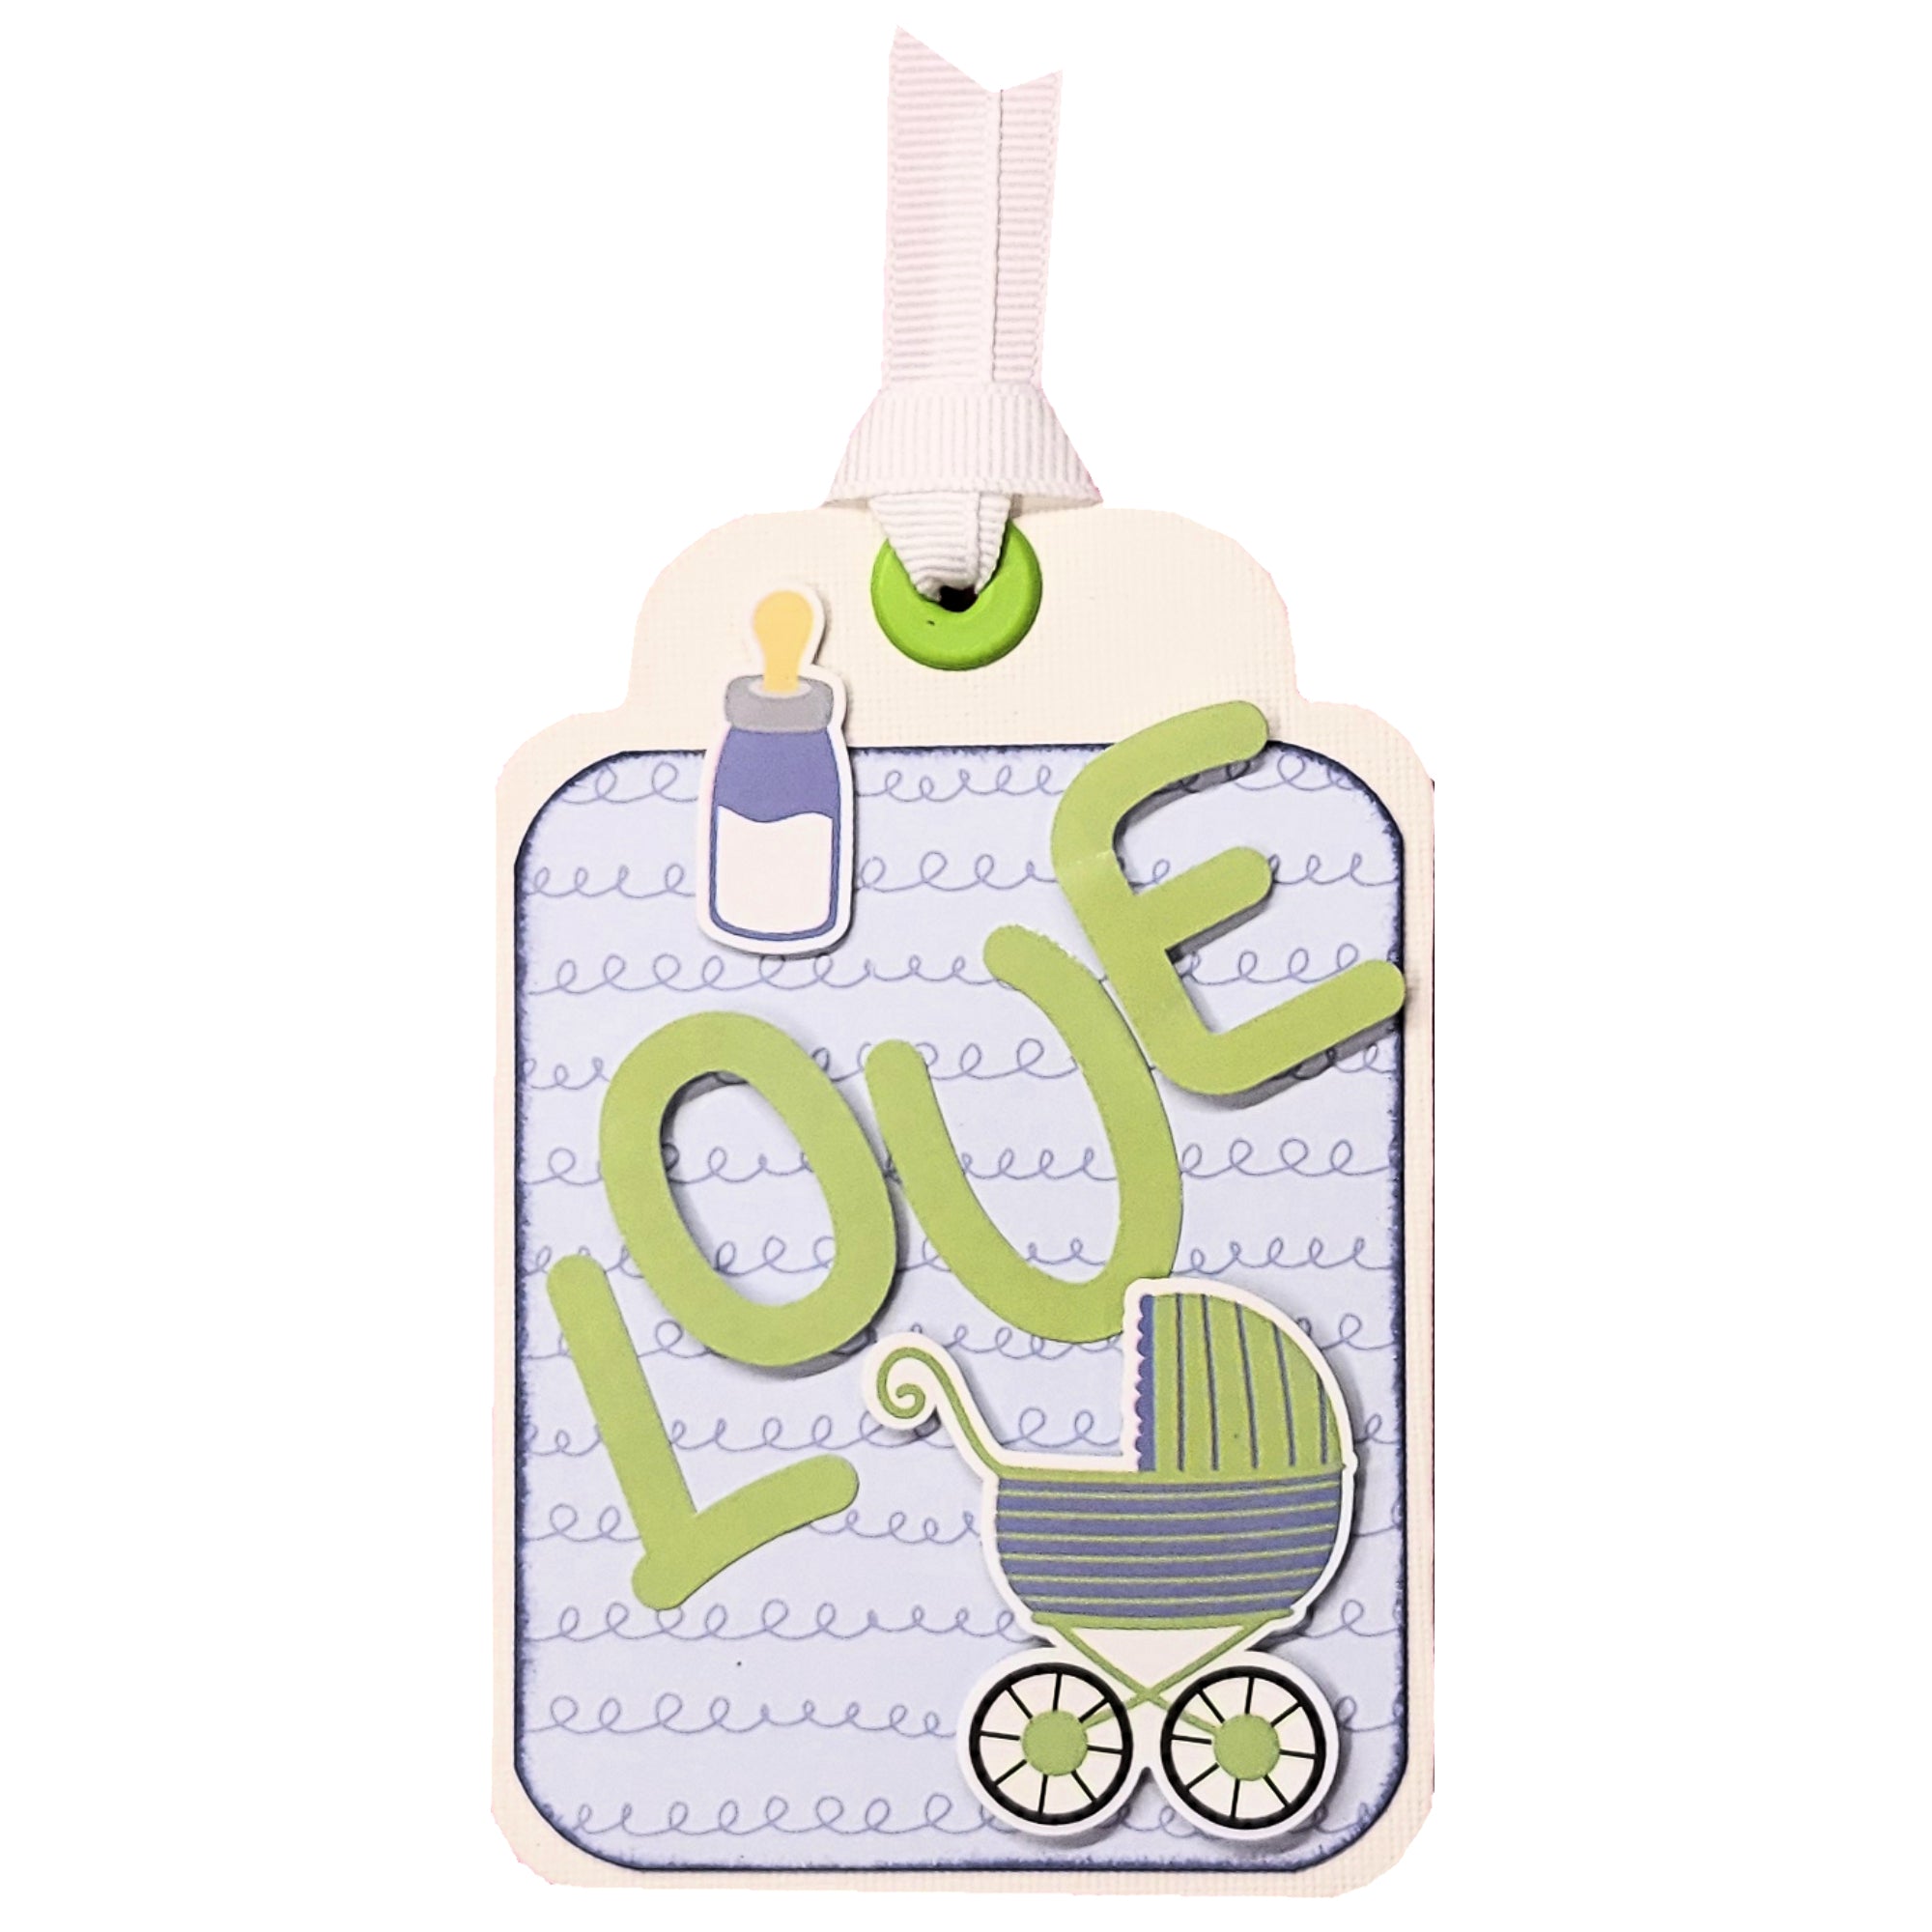 Hush Little Baby Collection Love & Pram 3 x 5 Tag Scrapbook Embellishment by SSC Designs